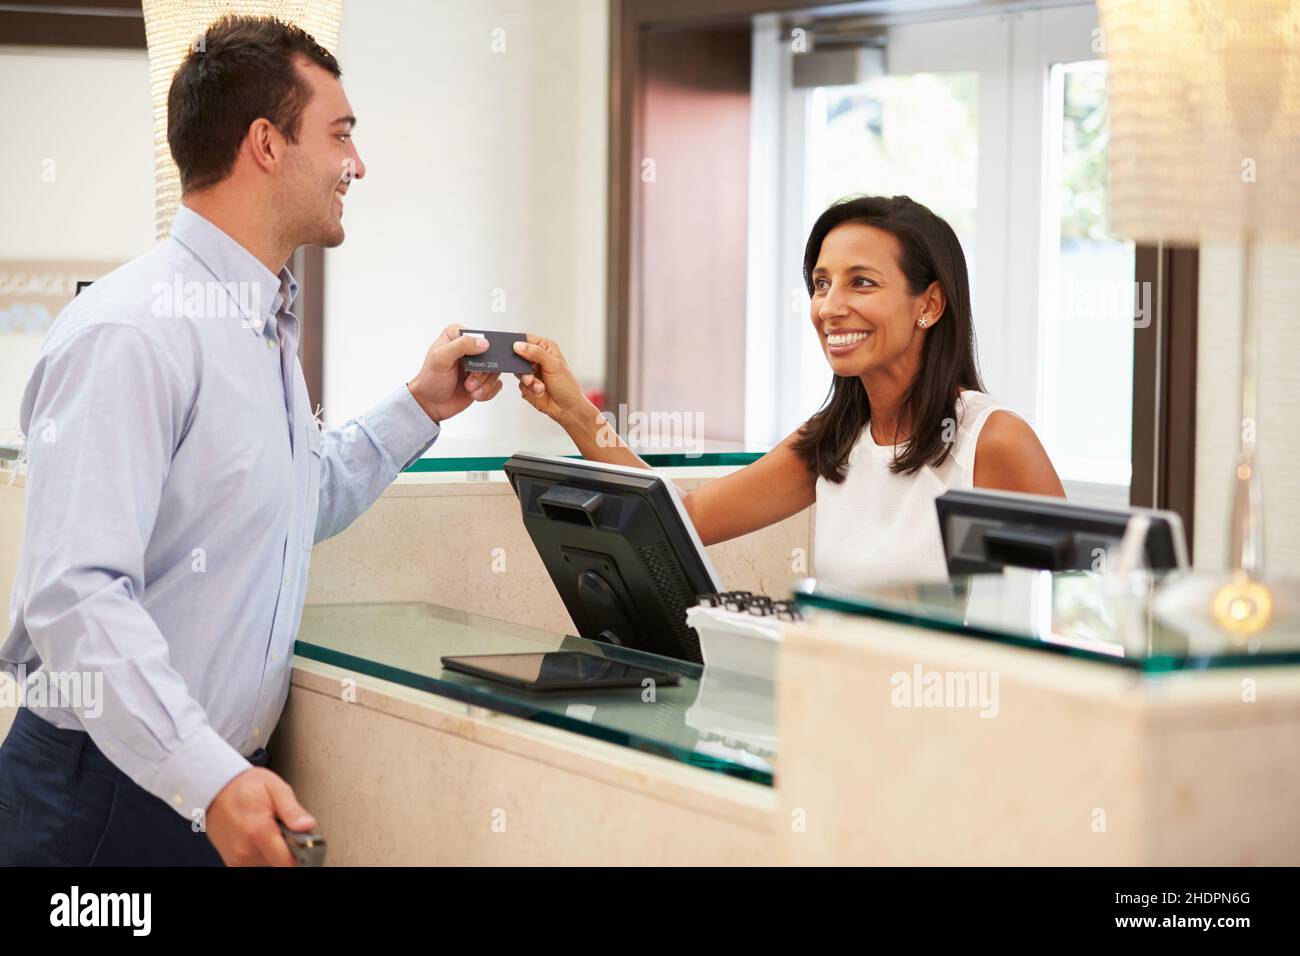 reception, check in, hotel manageress, receptionist, receptionists, receptions, check-ins Stock Photo